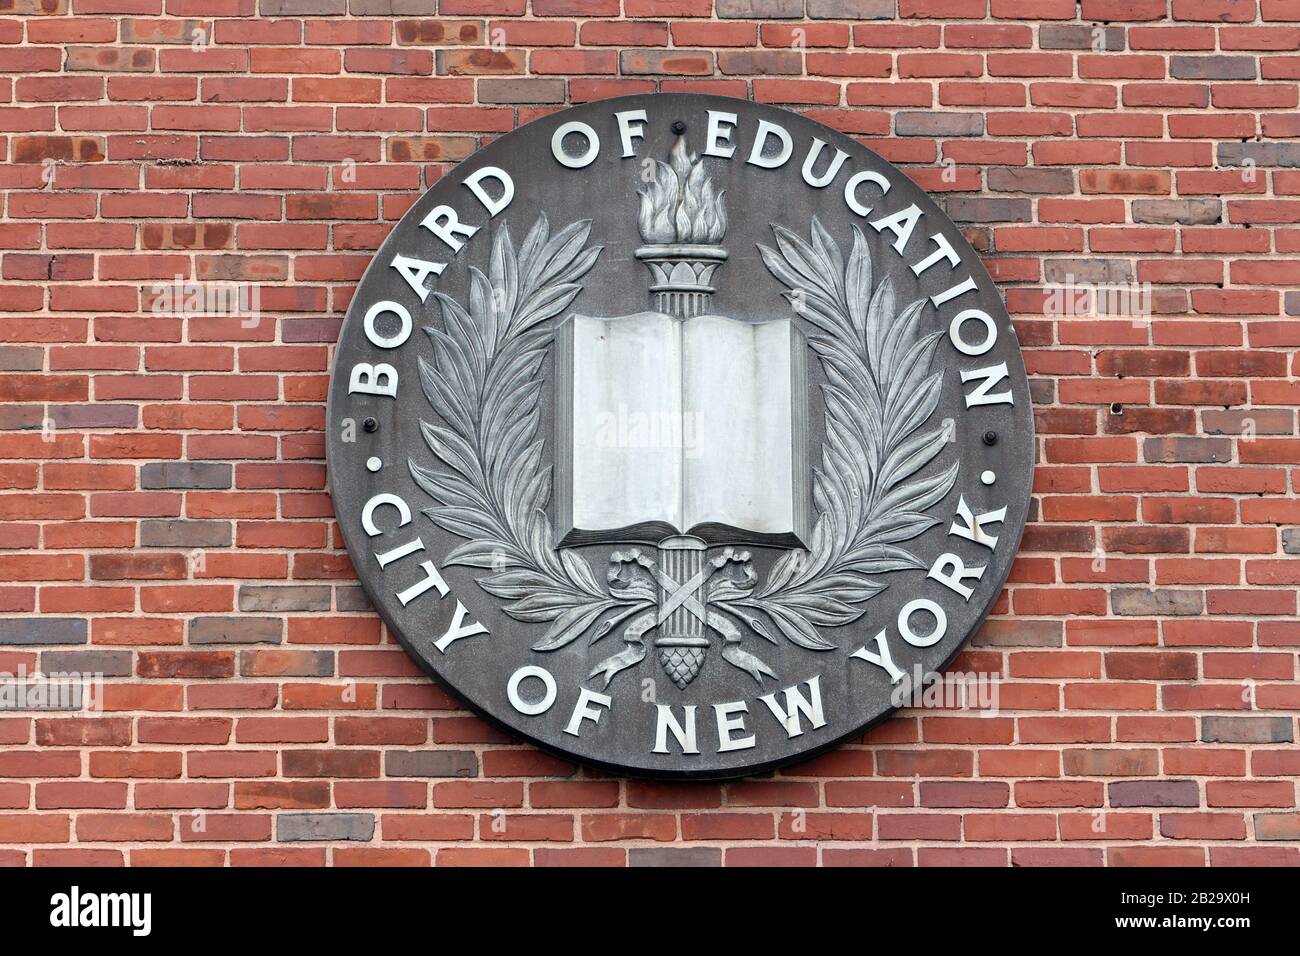 The seal of the old NYC Board of Education on a brick wall in New York